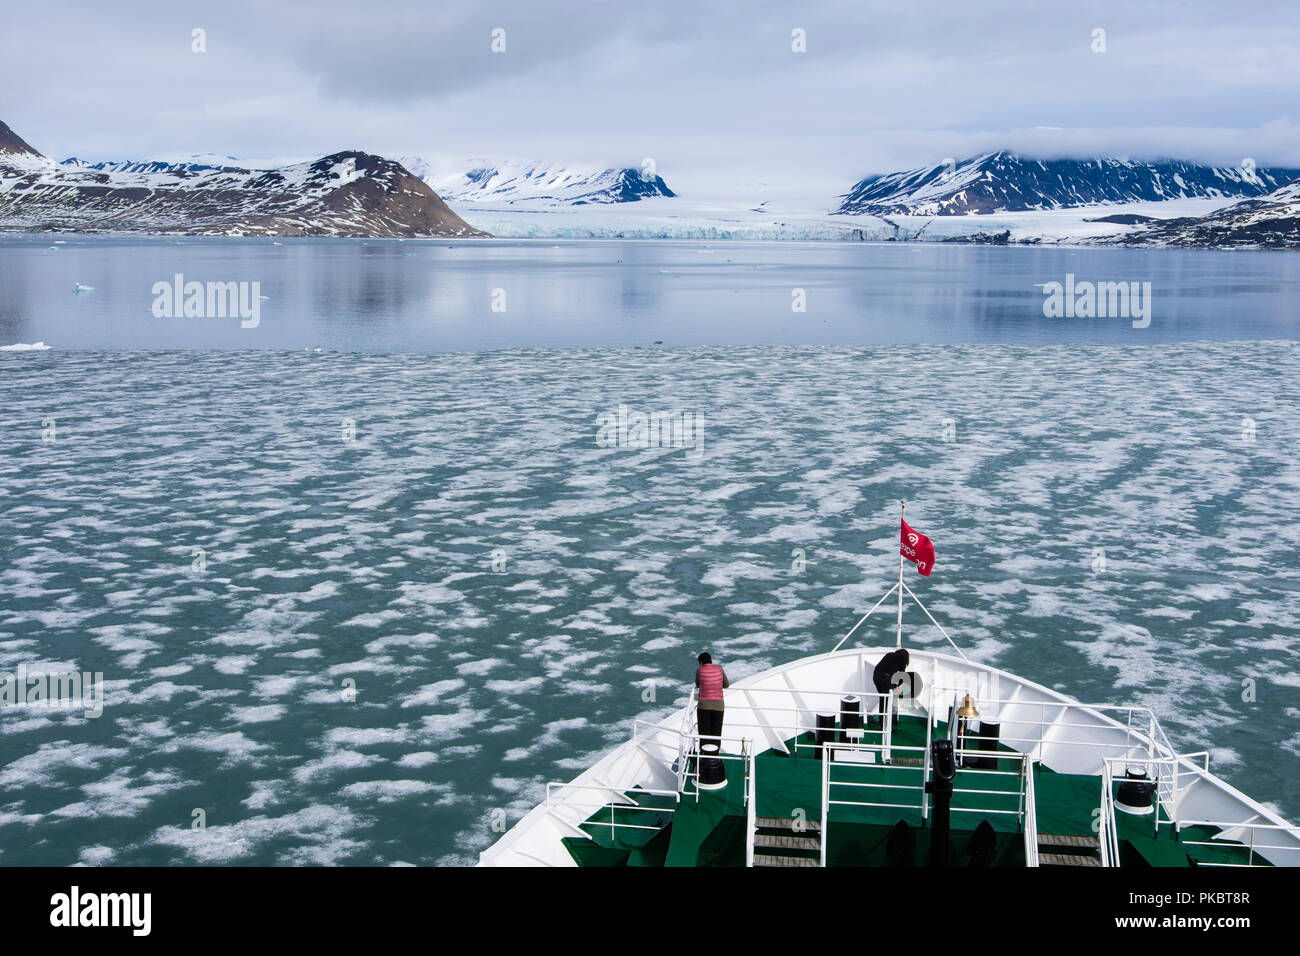 G Adventures Expedition cruise ship bow sailing through thin sea ice towards a glacier in a fjord in summer. Spitsbergen Svalbard Archipelago Norway Stock Photo